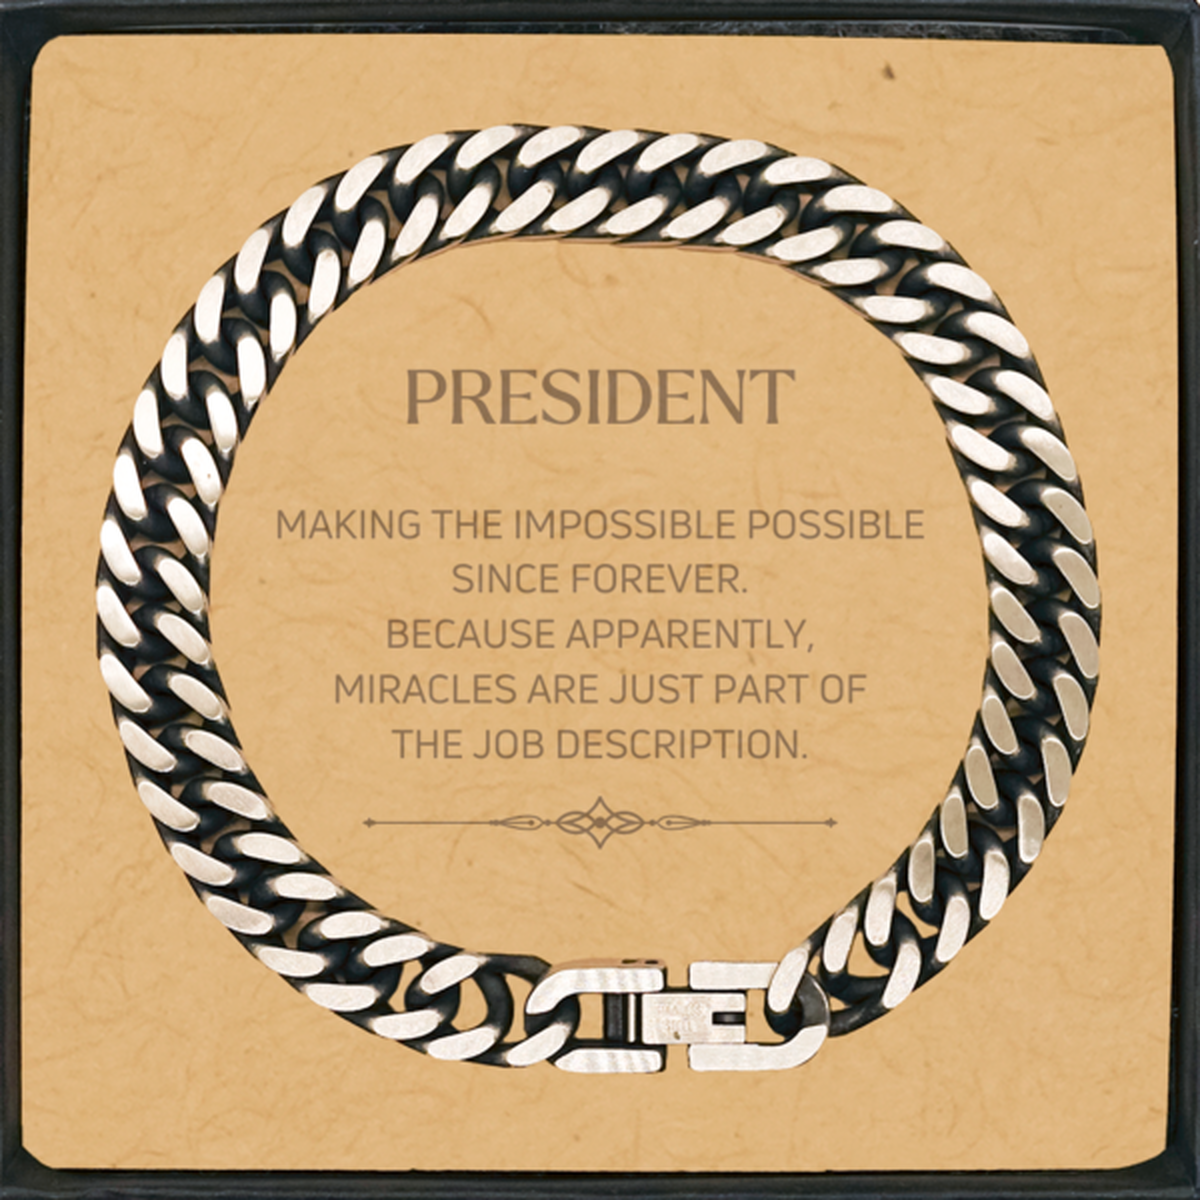 Funny President Gifts, Miracles are just part of the job description, Inspirational Birthday Cuban Link Chain Bracelet For President, Men, Women, Coworkers, Friends, Boss